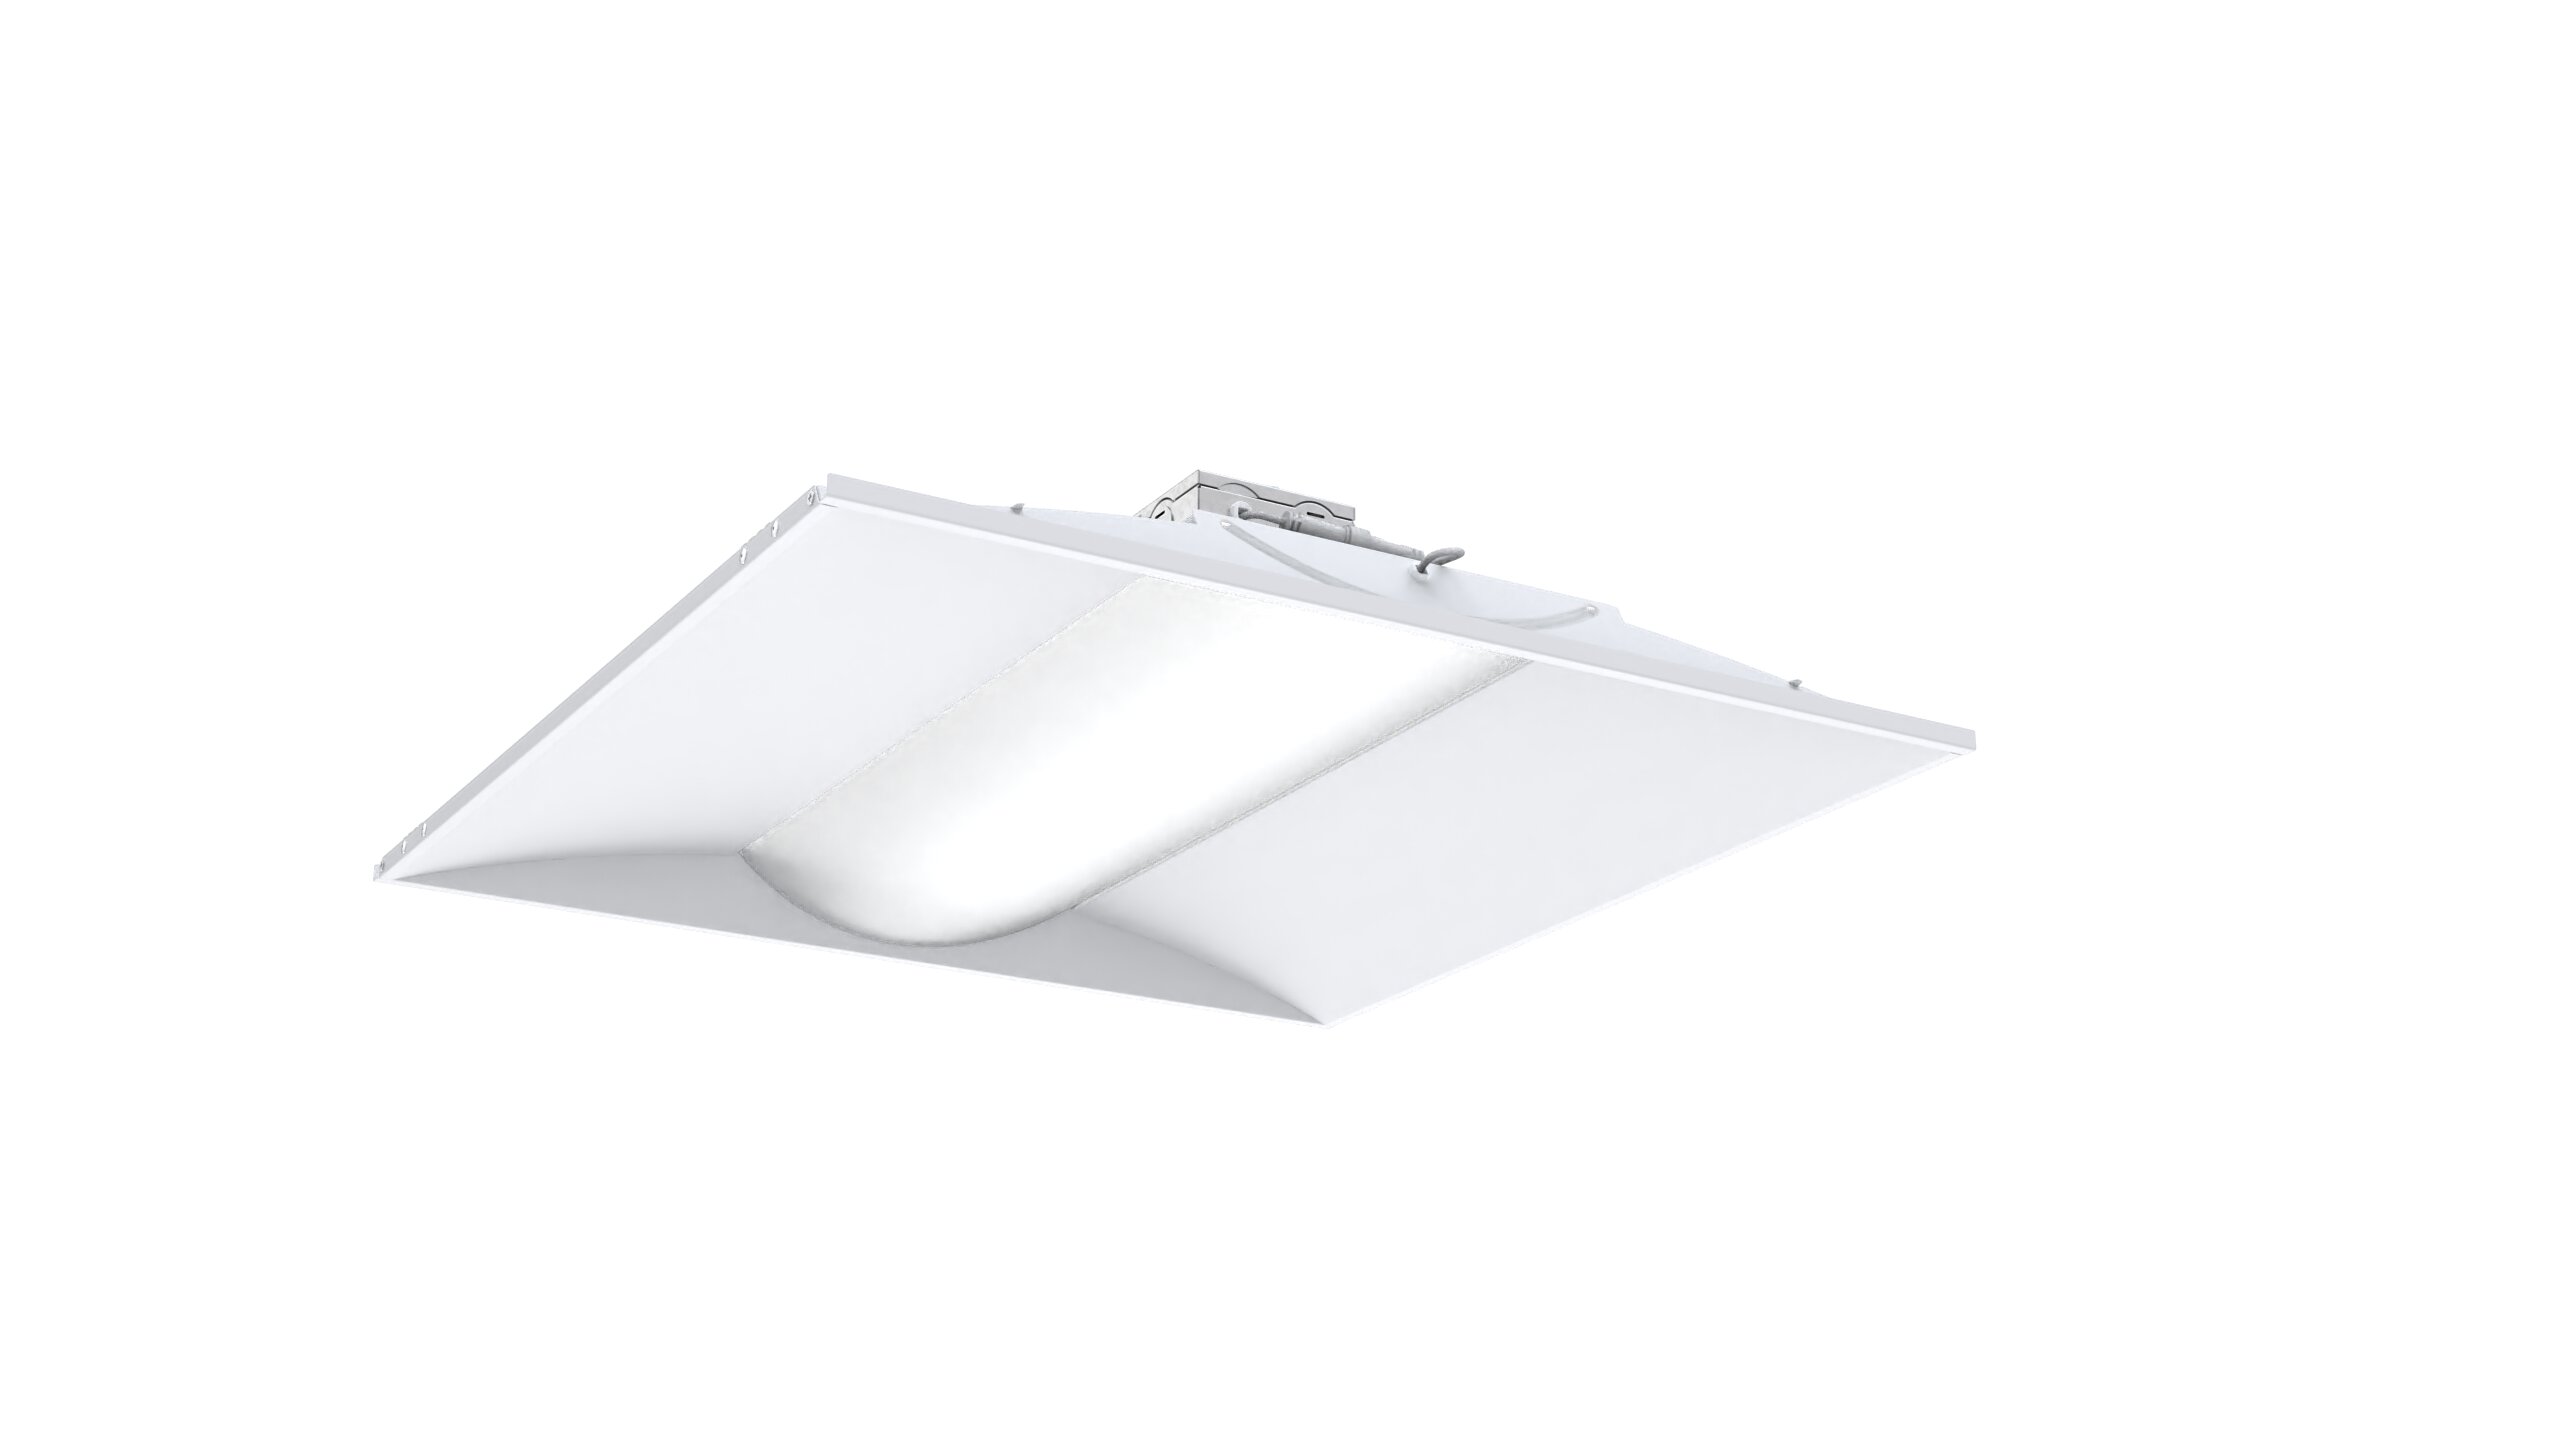 Lithonia Lighting Dimmable Rectangle Troffer Ceiling Light